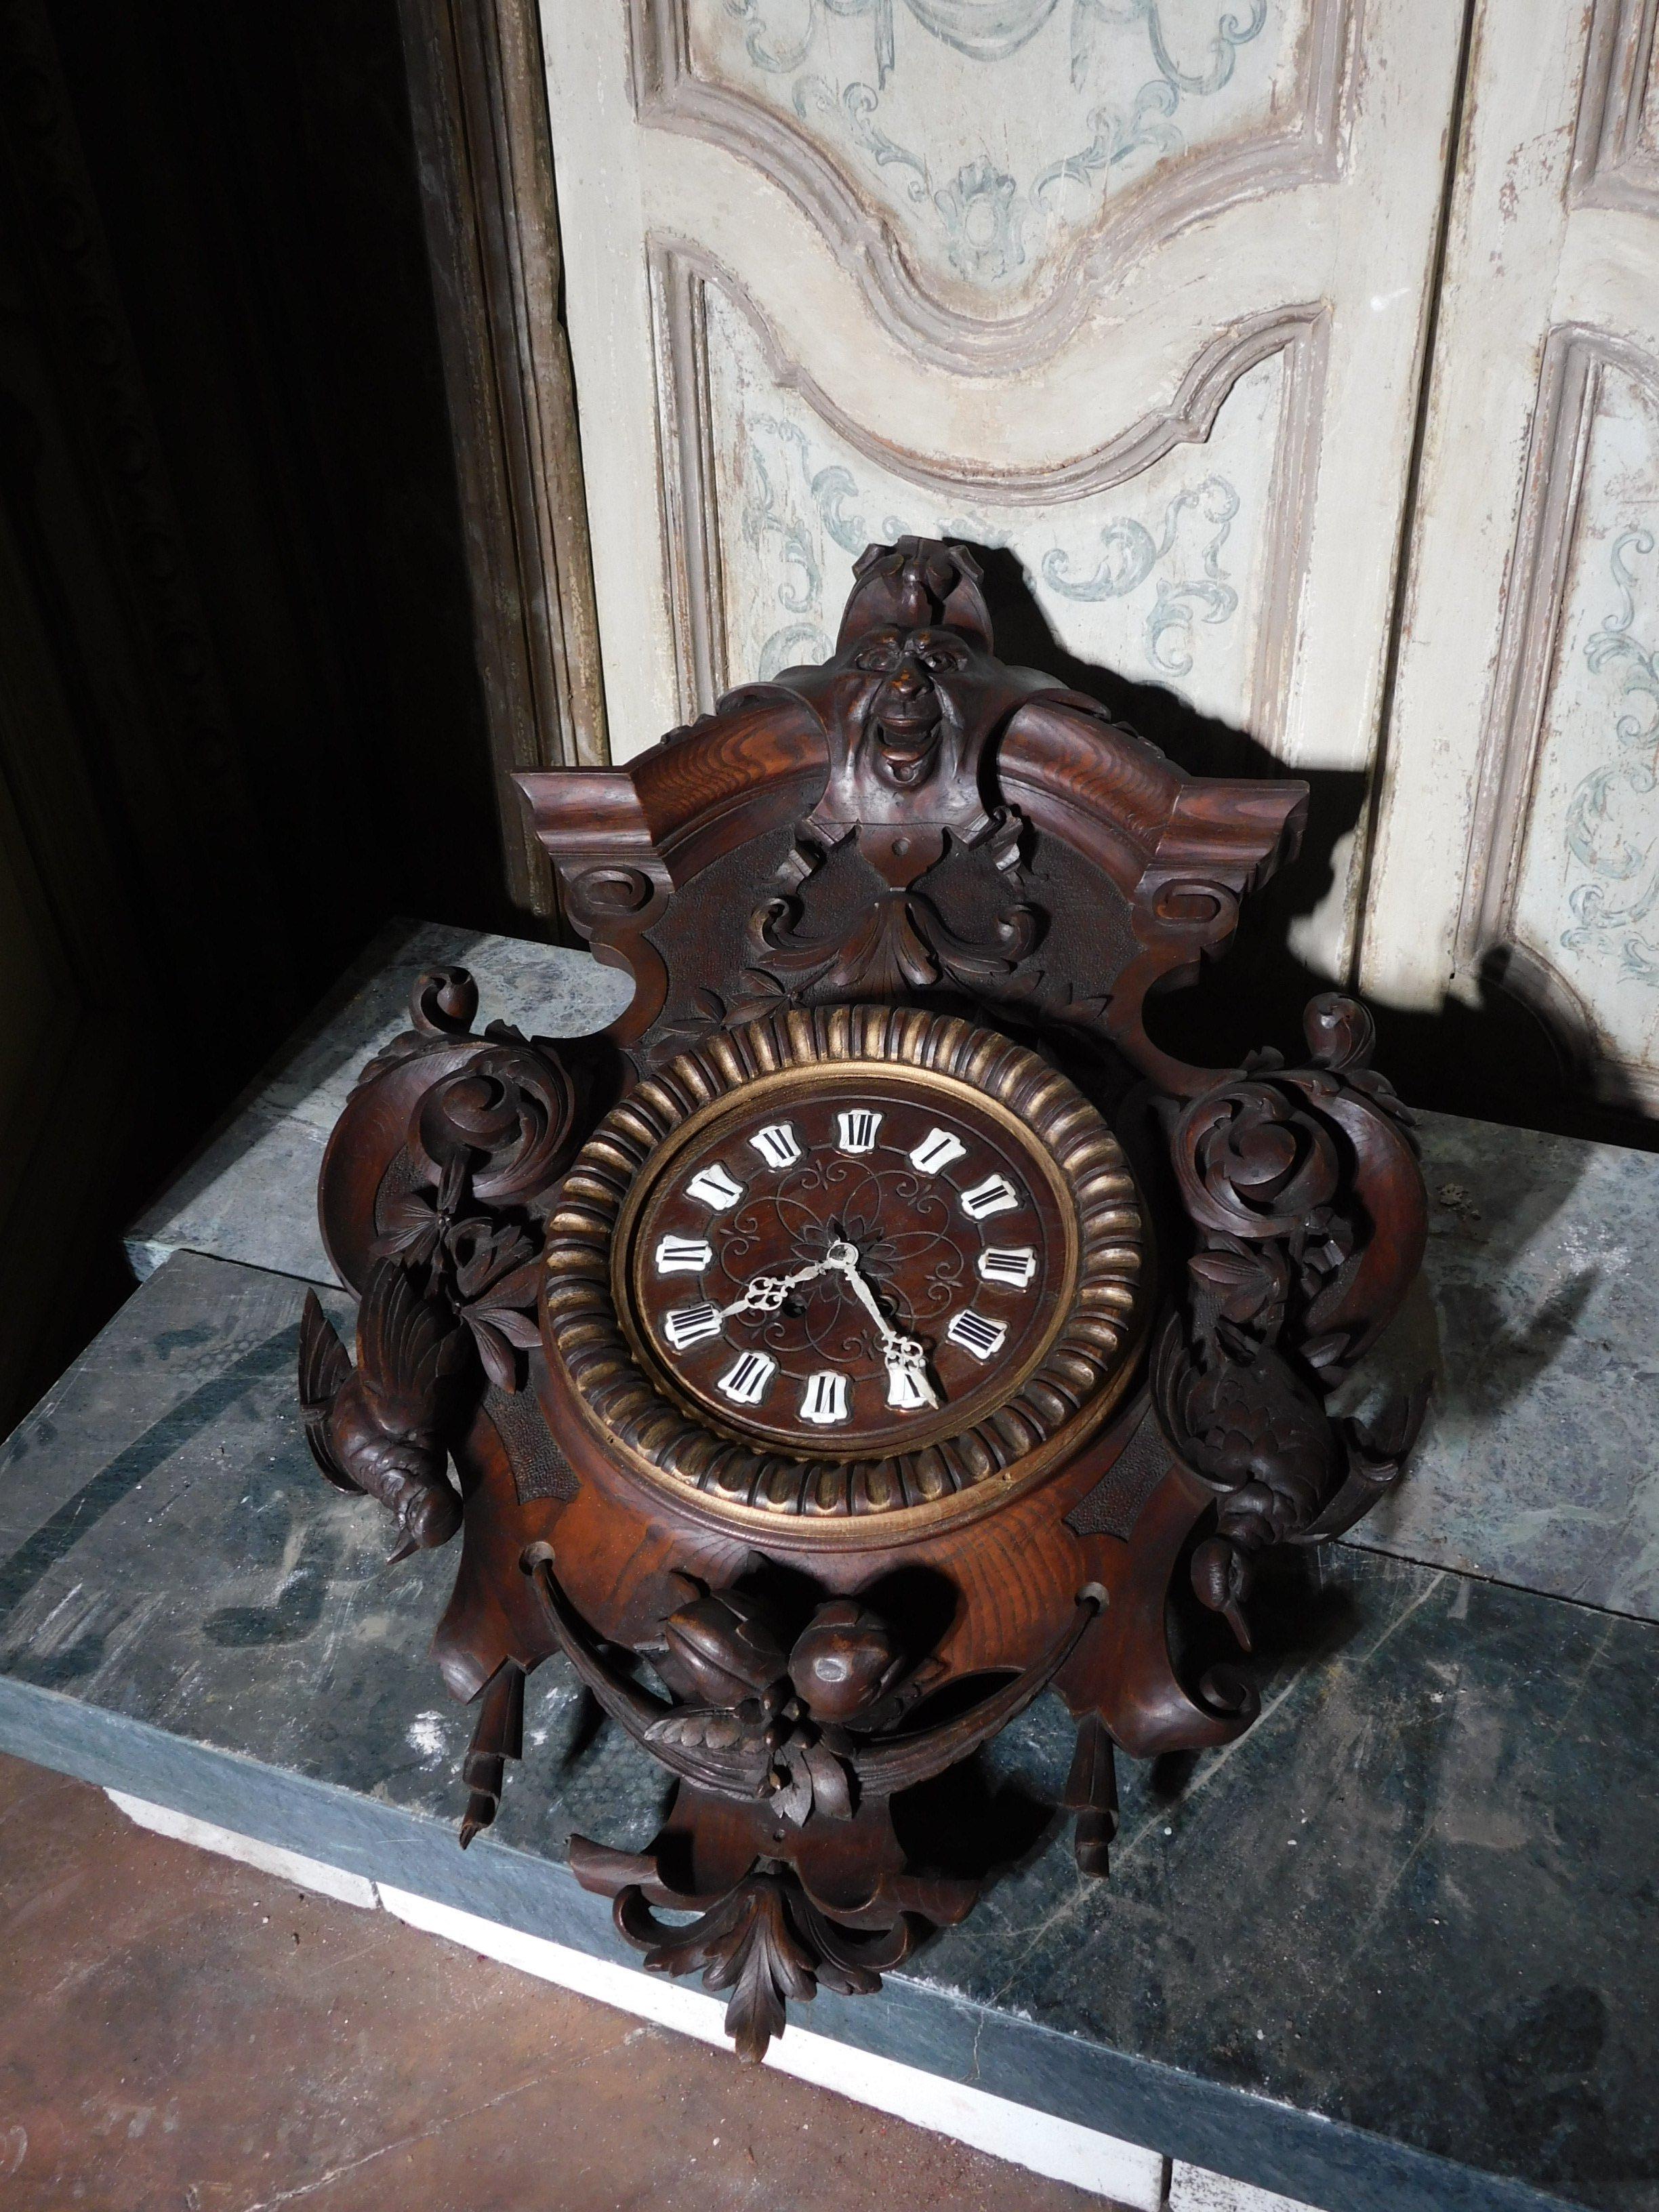 Italian Antique Wooden Wall Clock, Brown Richly Decorated, 1800, Italy